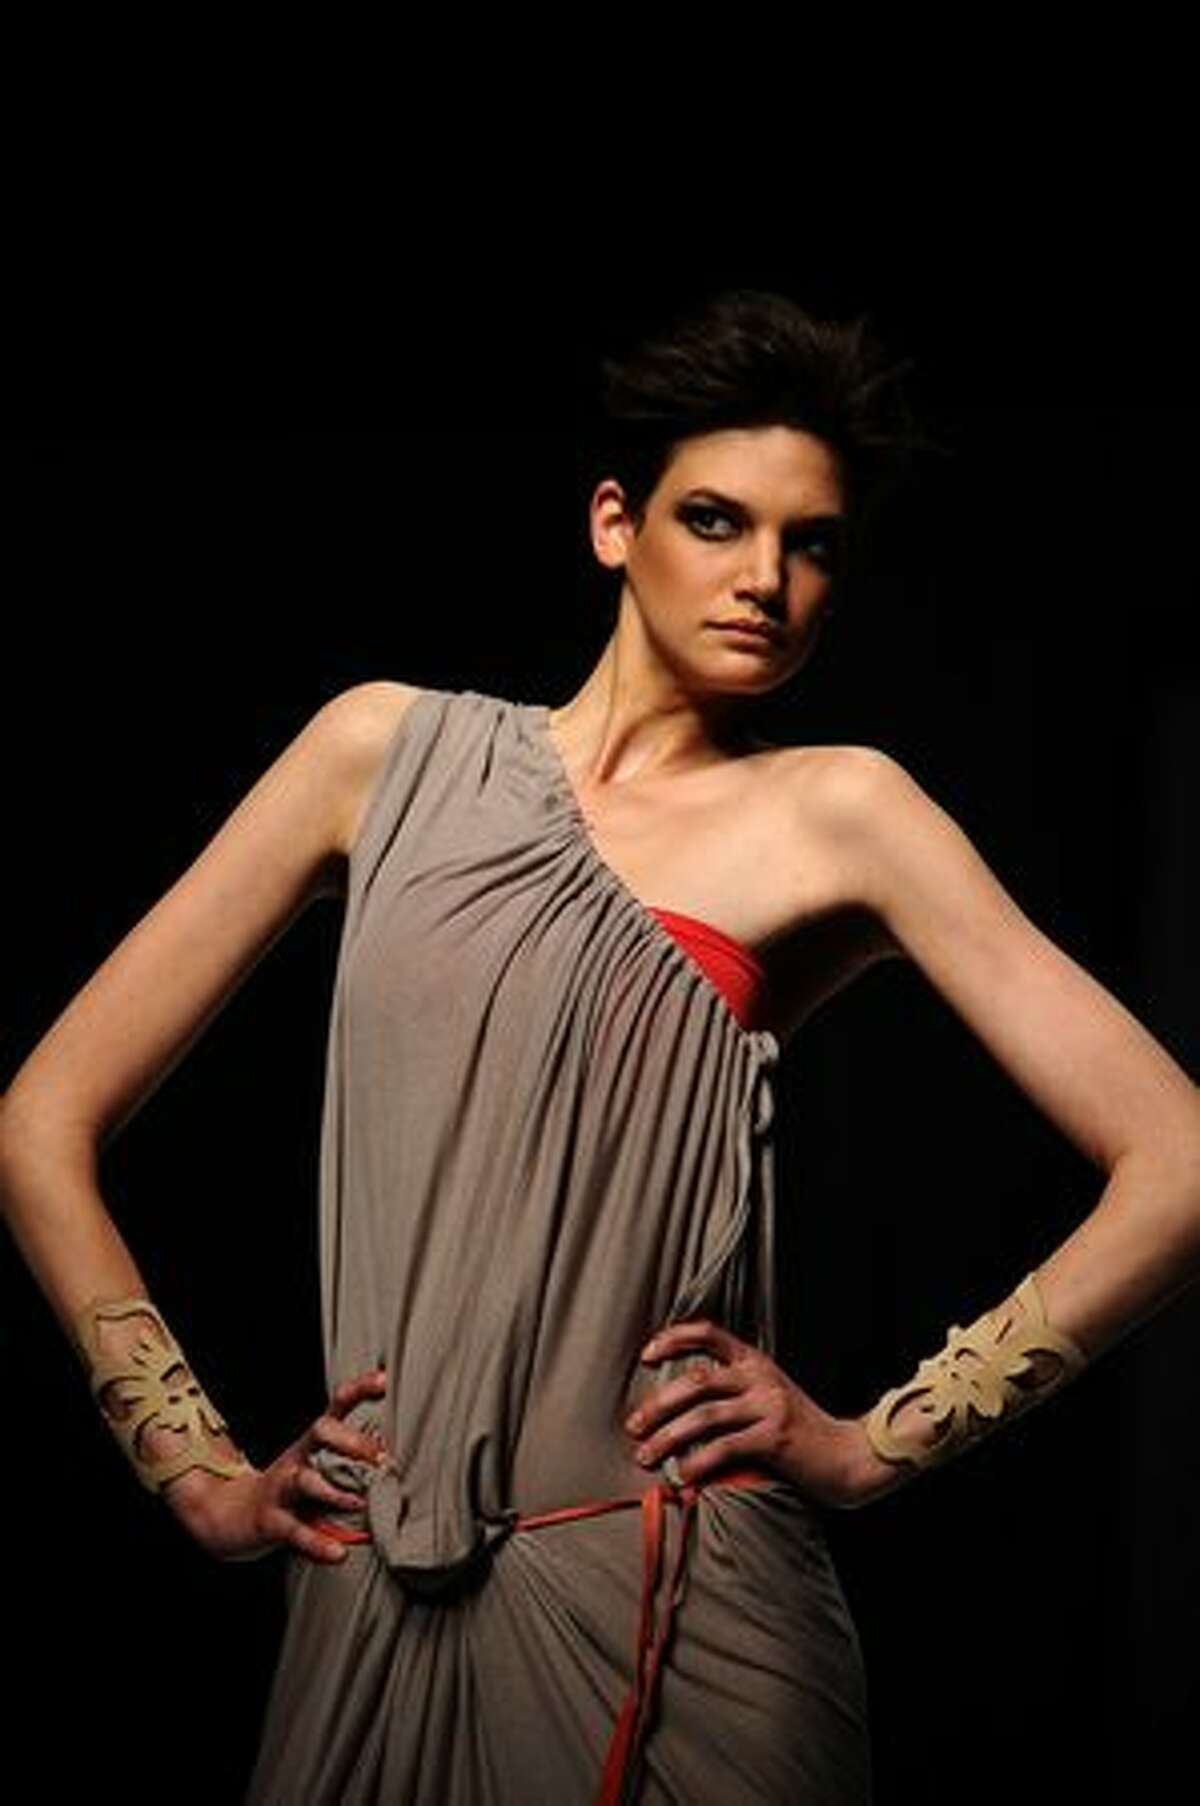 A model showcases a creation by designer "Michelle Ludek" on August 12, 2010 during the Cape Town fashion week at the Cape Town International Convention Center in Cape Town.